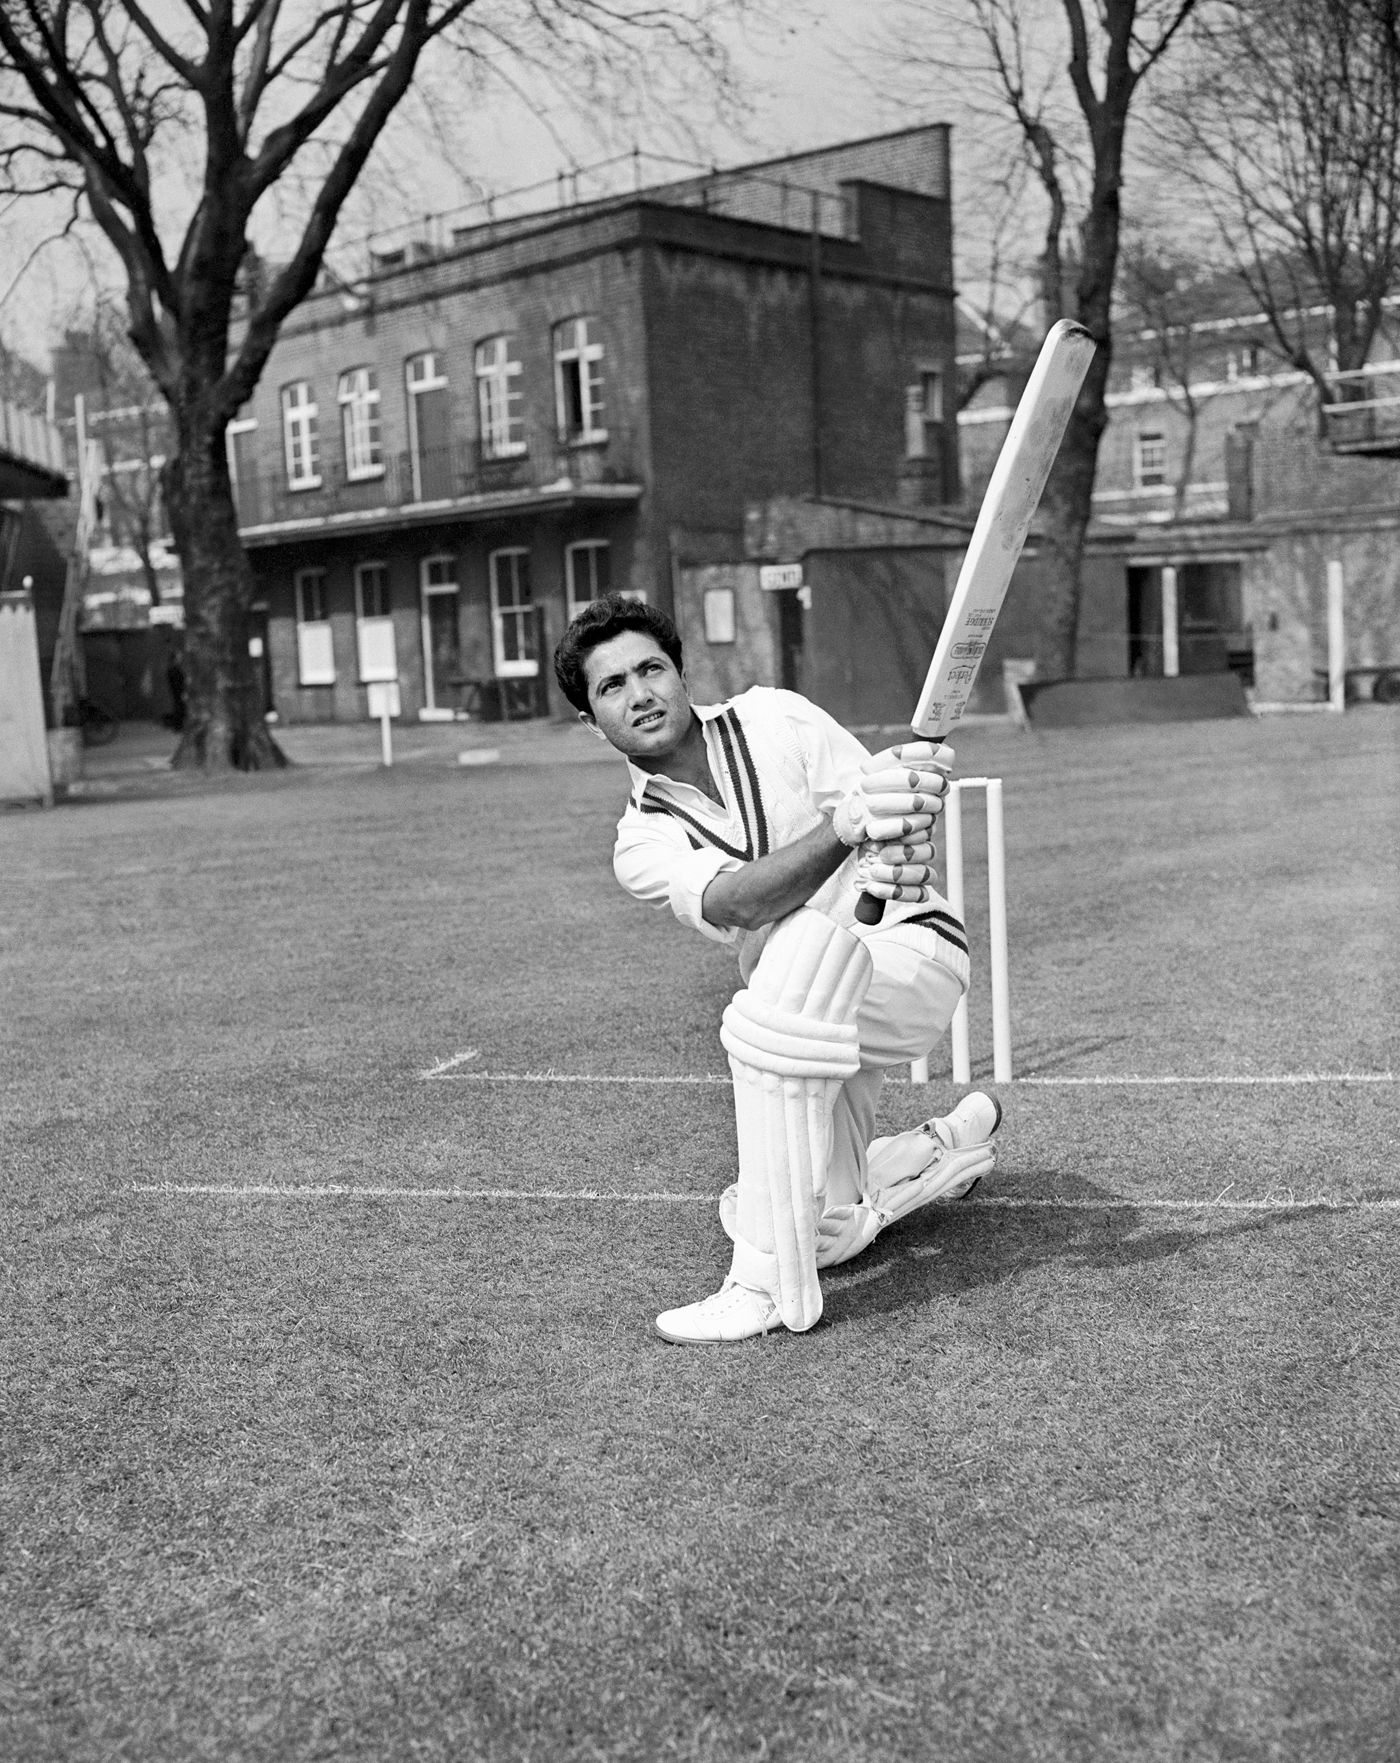 Hanif Mohammad at the Pakistan nets at Lord's in 1962